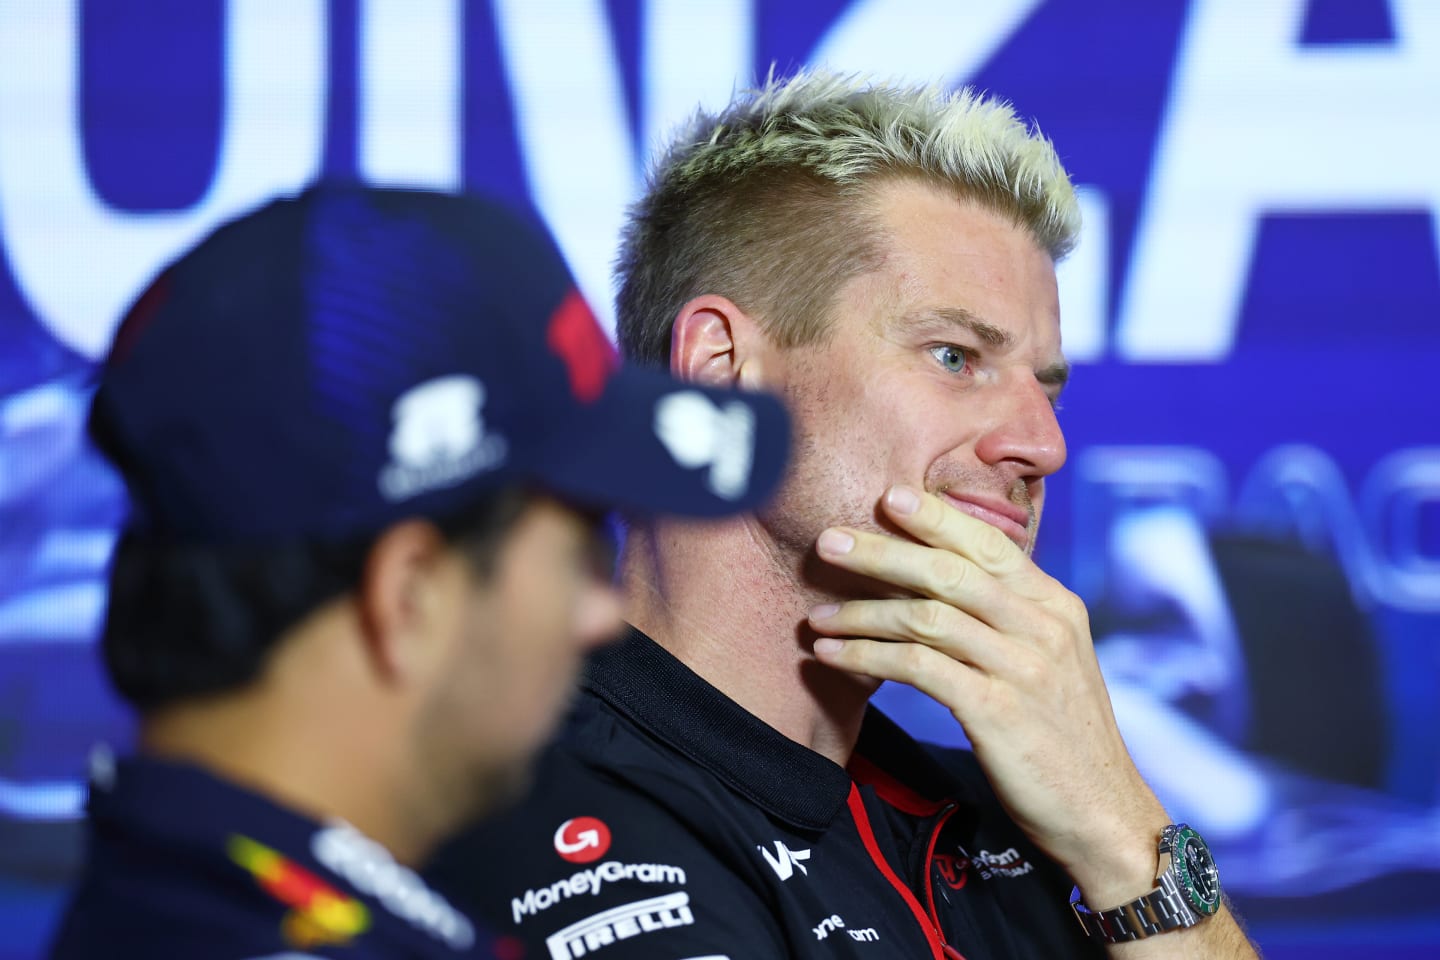 MONZA, ITALY - AUGUST 31: Nico Hulkenberg of Germany and Haas F1 looks on in the Drivers Press Conference during previews ahead of the F1 Grand Prix of Italy at Autodromo Nazionale Monza on August 31, 2023 in Monza, Italy. (Photo by Bryn Lennon/Getty Images)